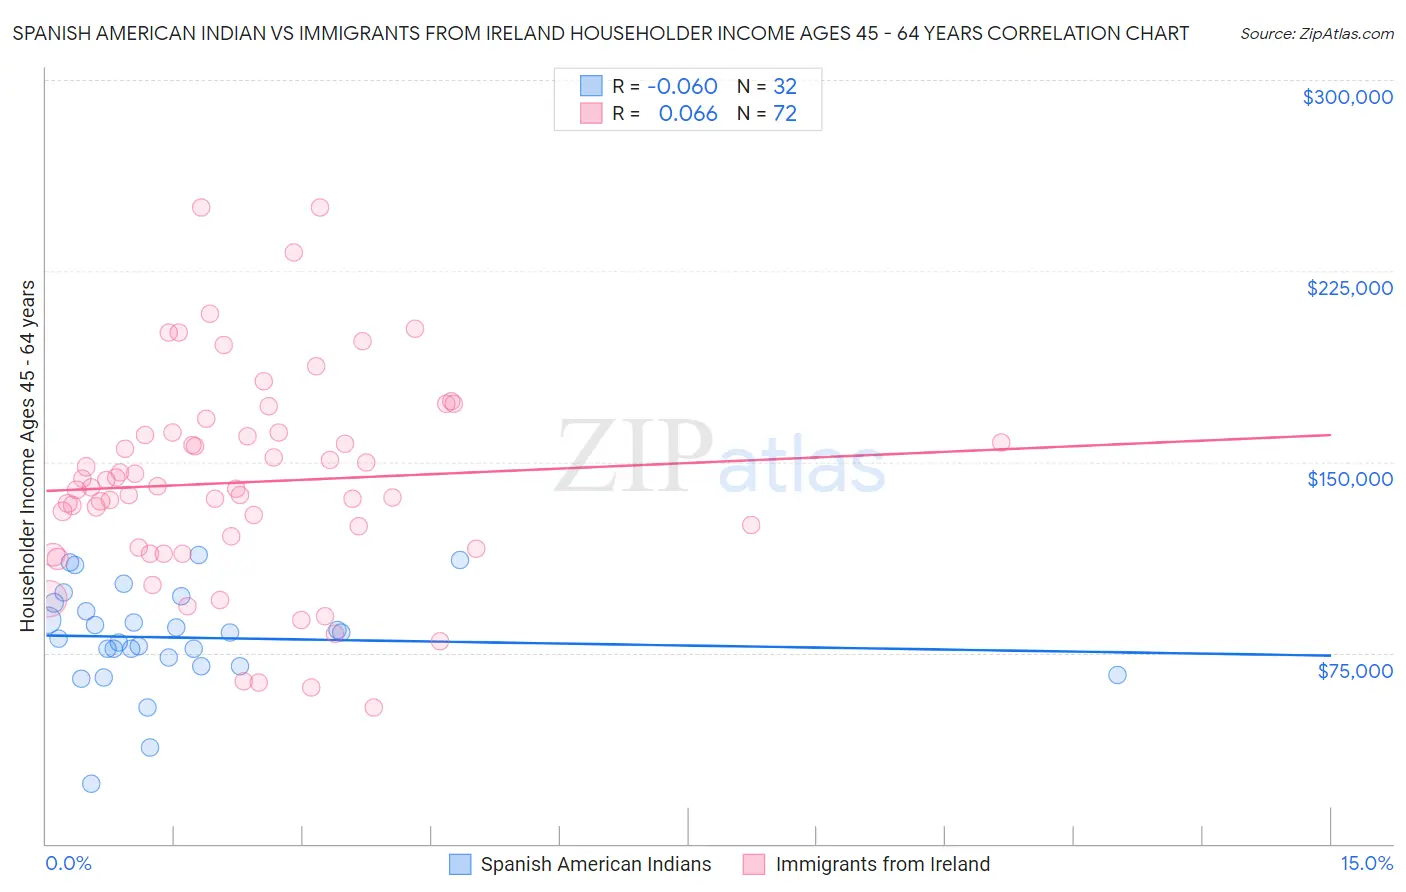 Spanish American Indian vs Immigrants from Ireland Householder Income Ages 45 - 64 years